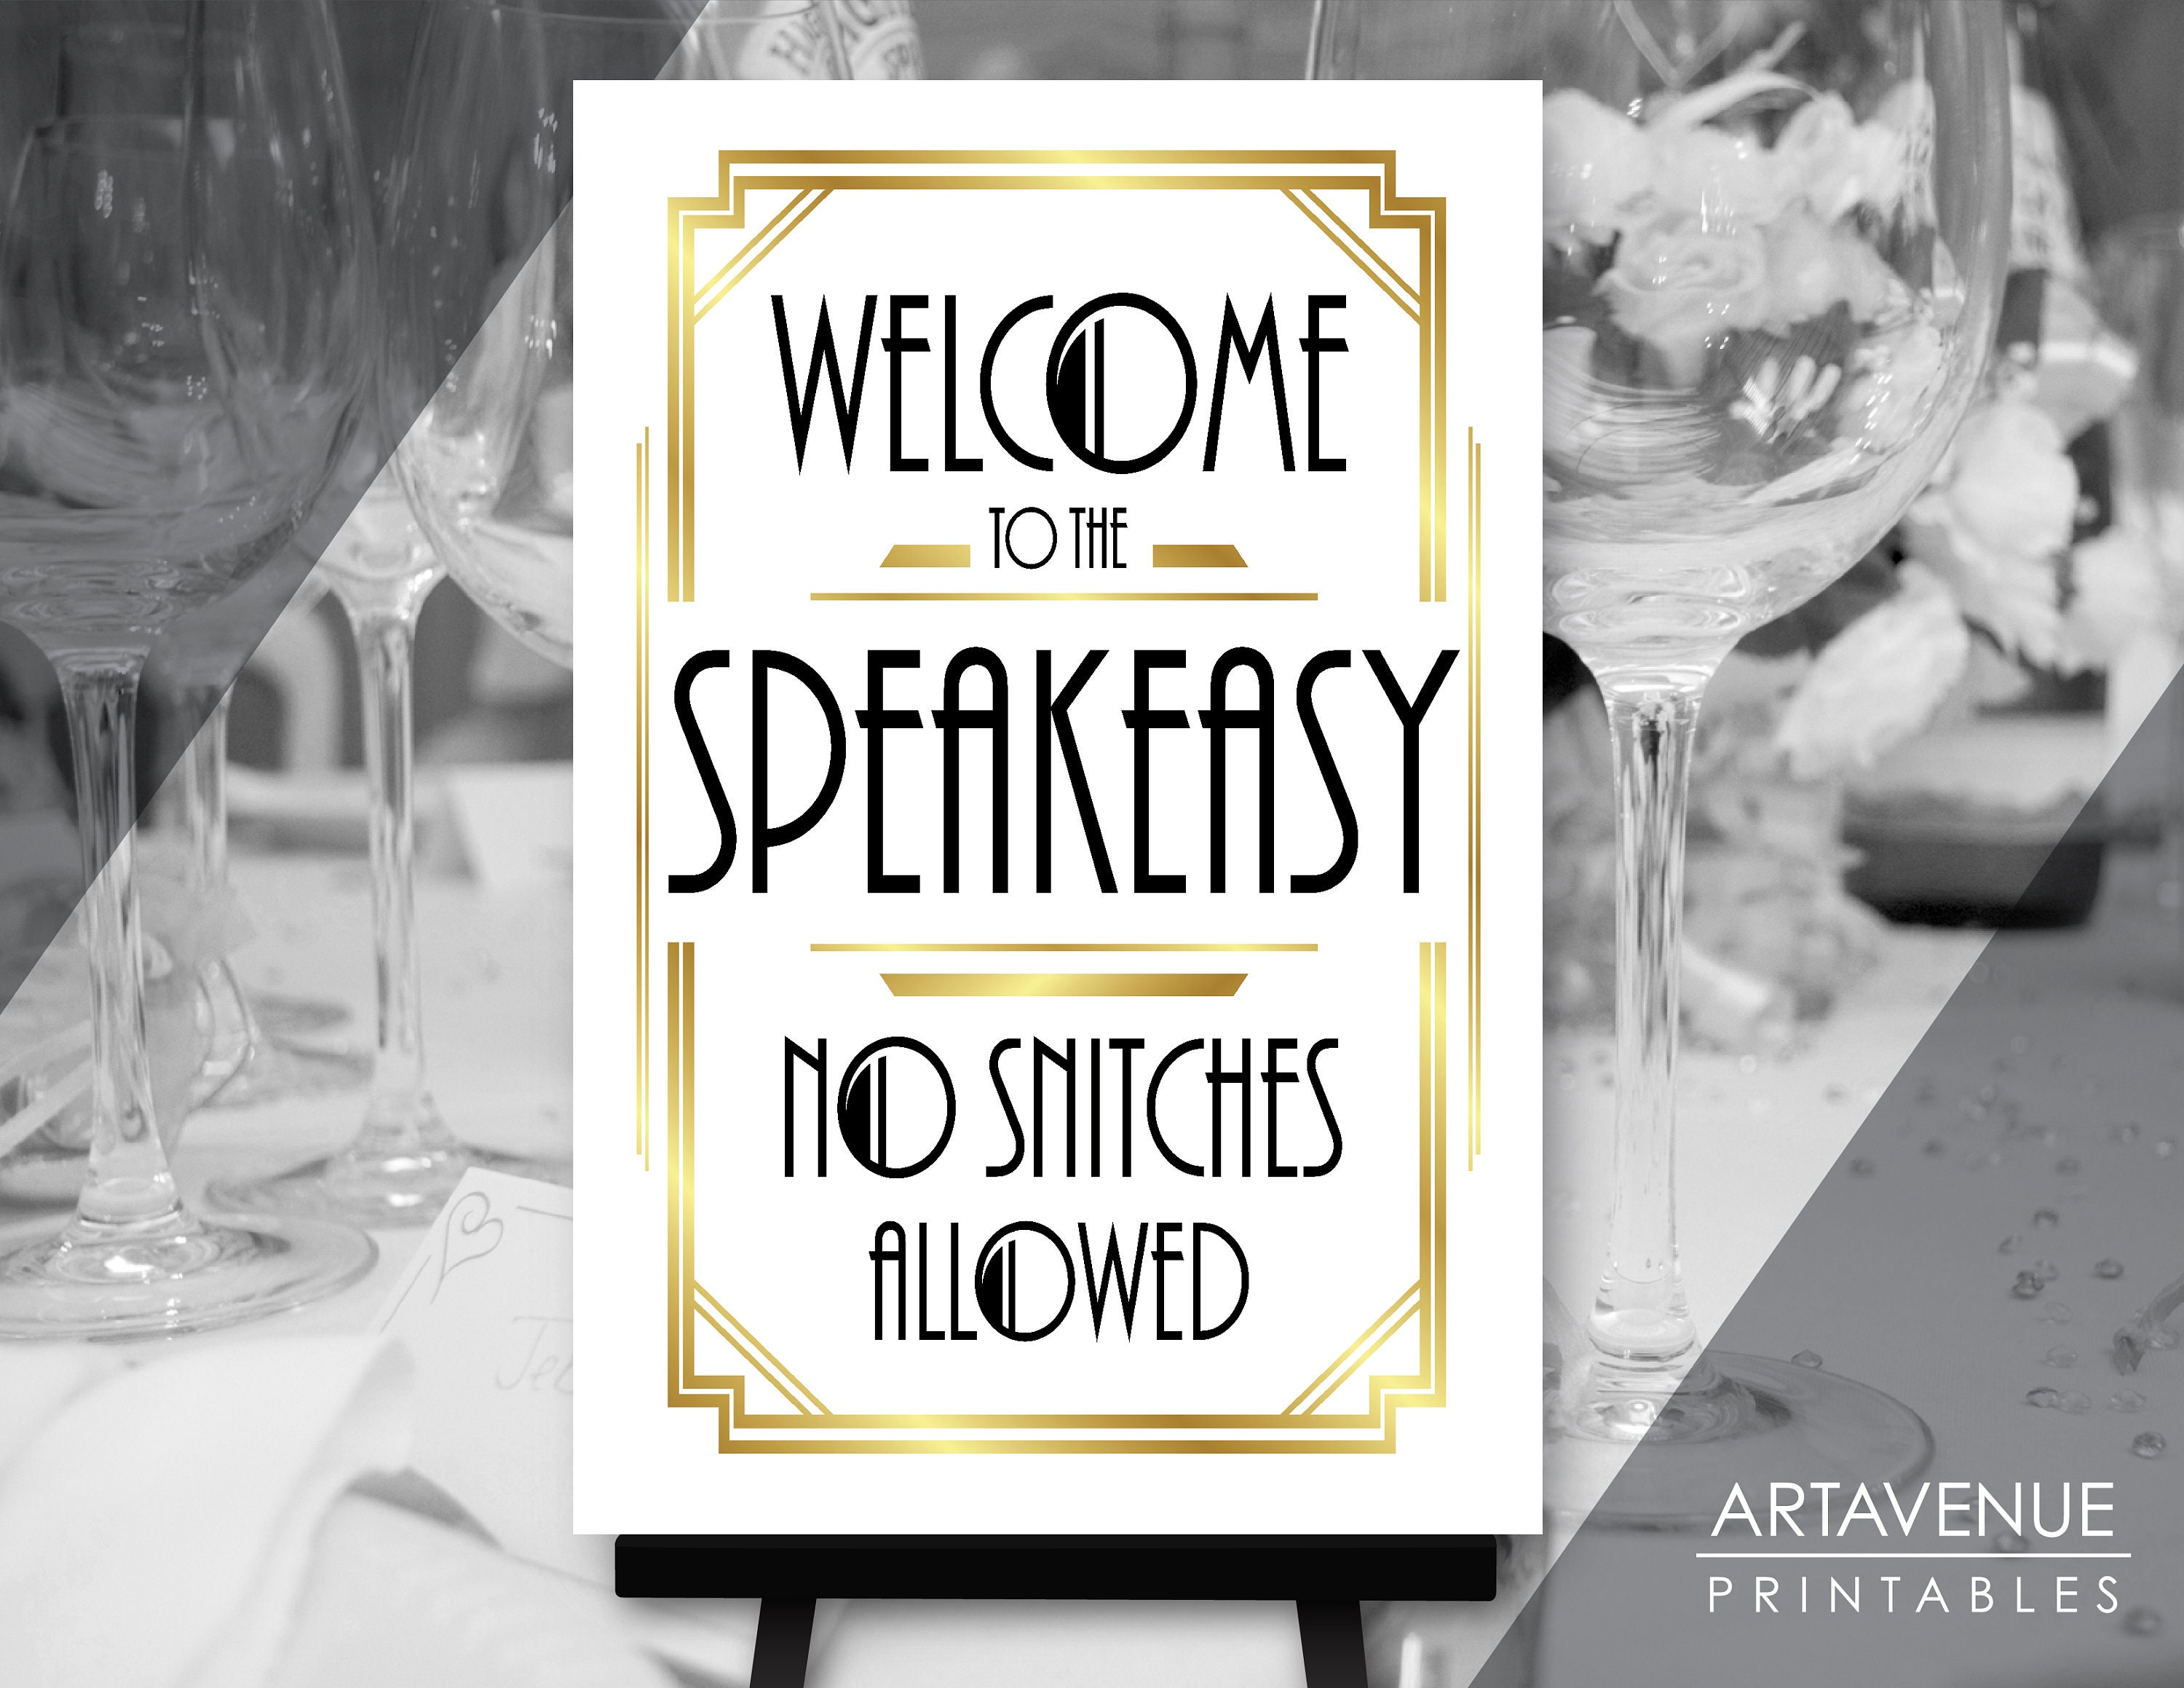 Roaring 20's Party Decor 24 X 36 SPEAKEASY WELCOME Sign Download